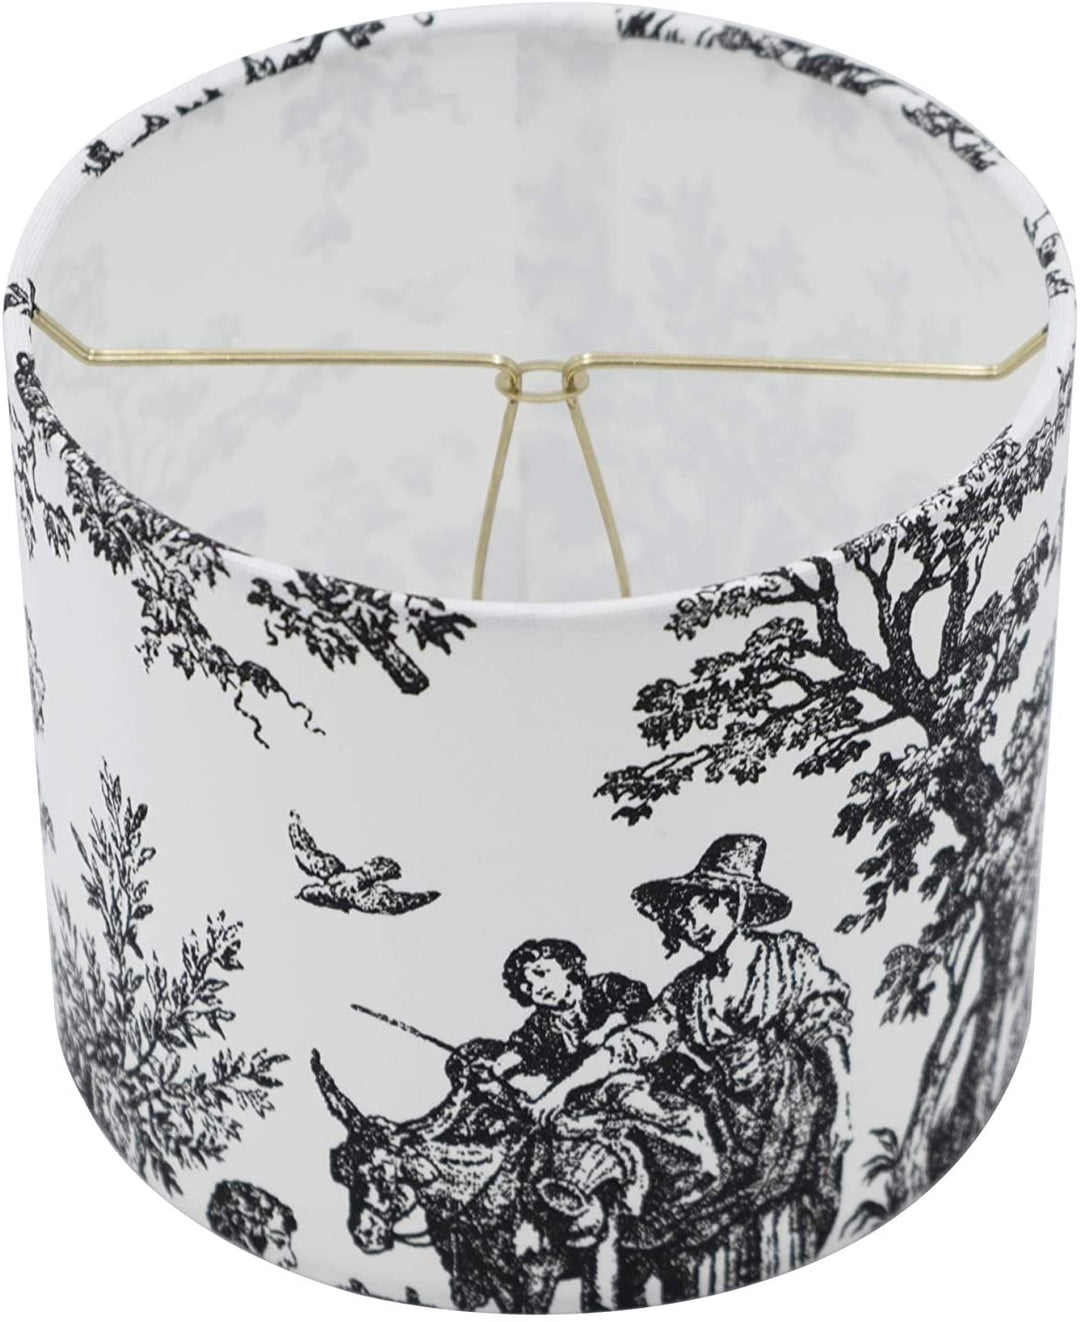 French Toile Black and White 7 Inch Retro Barrel Drum Clip On Chandelier Lamp Shade